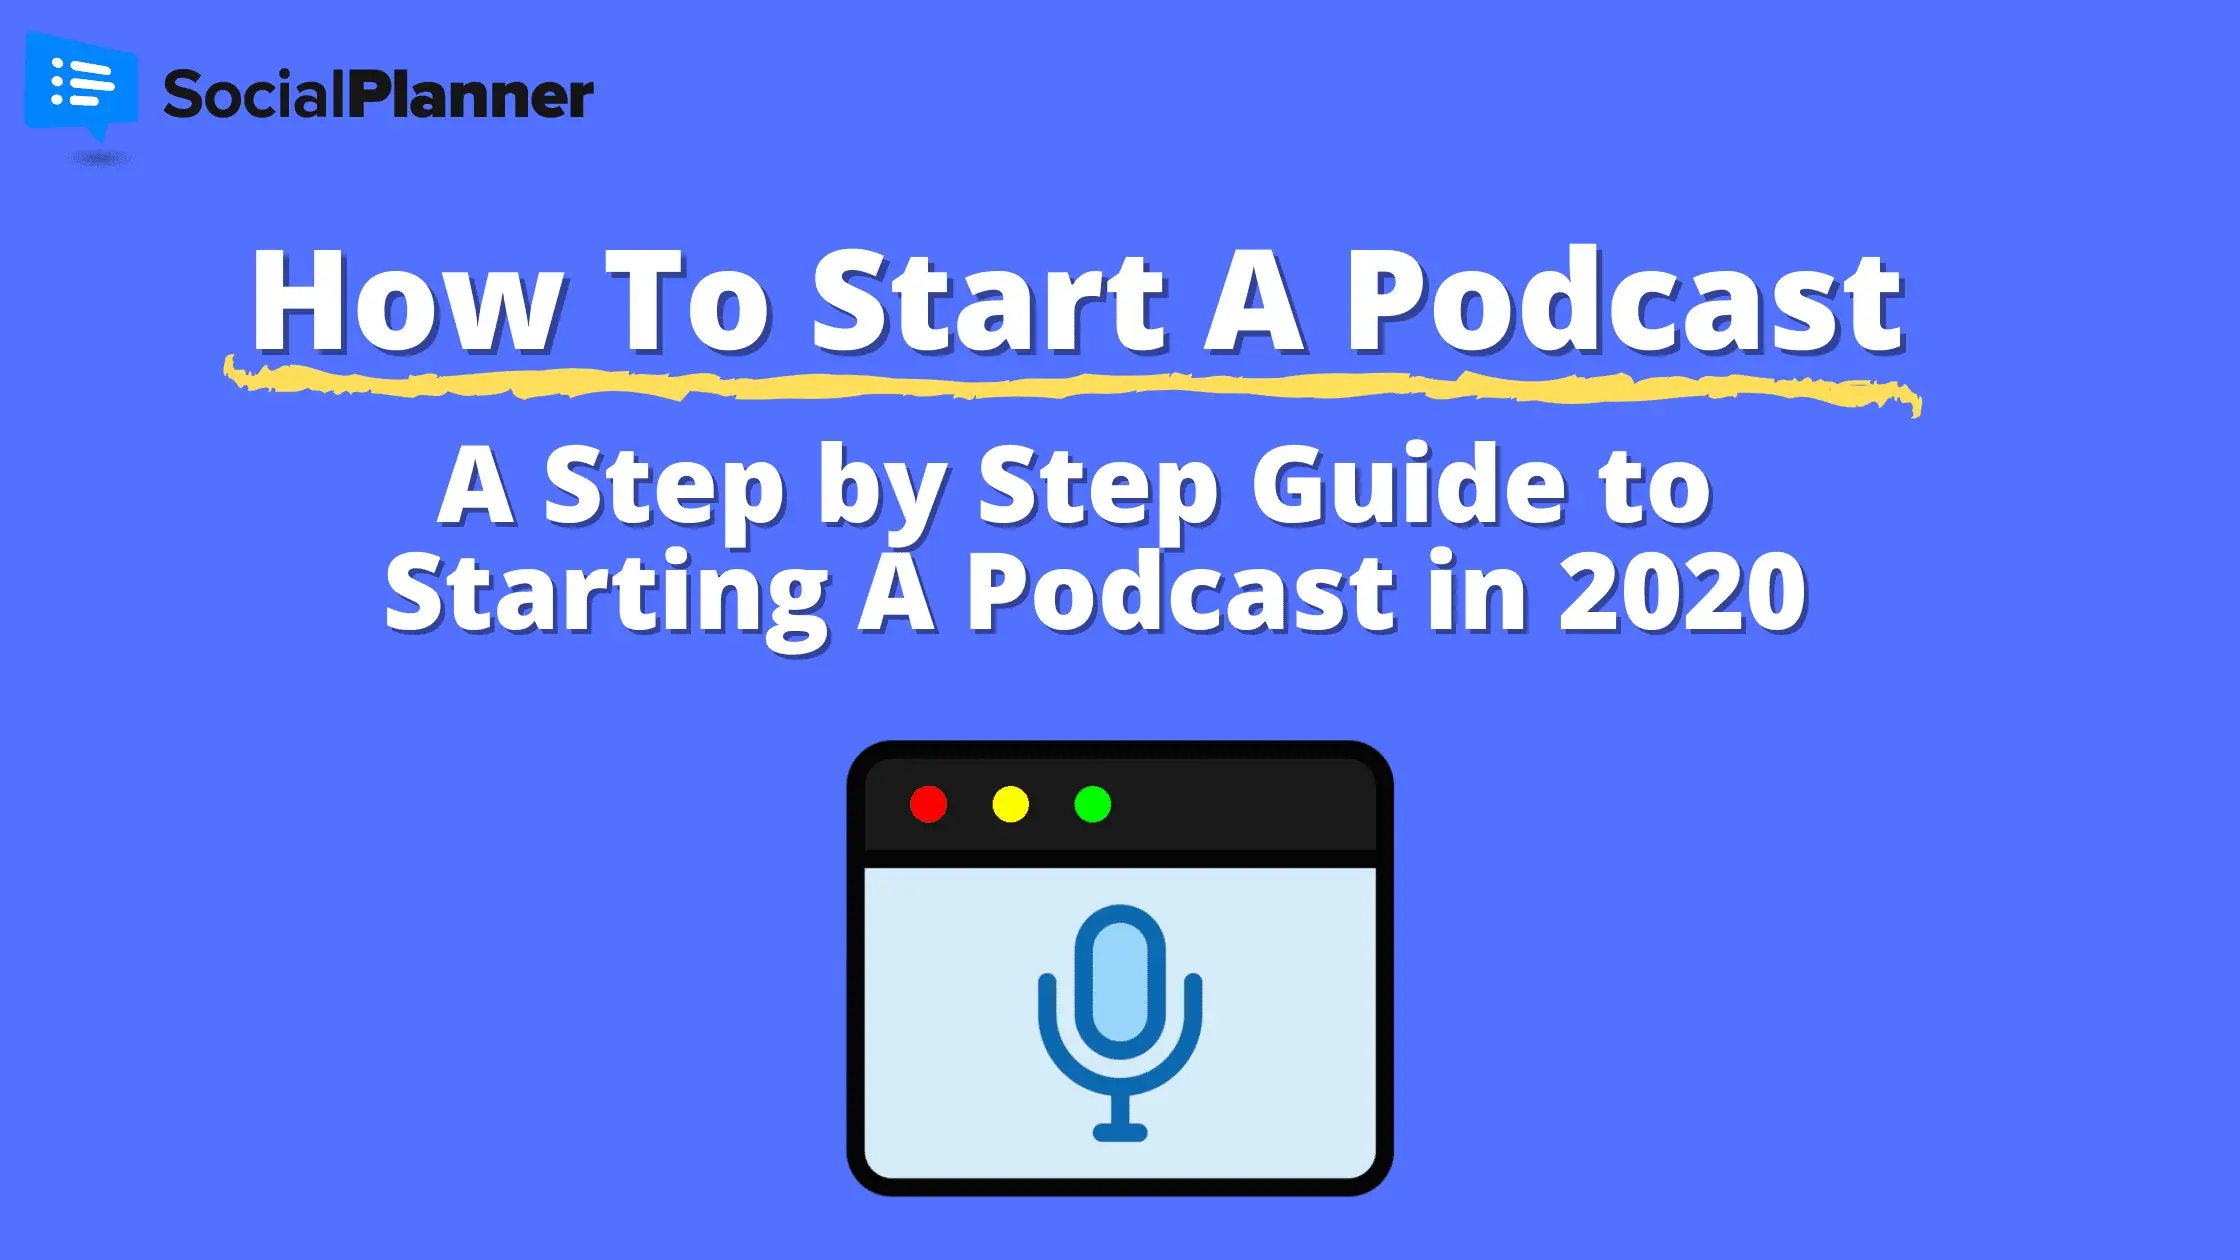 How To Start a Podcast - A Step by Step Guide for Starting A Podcast in 2020